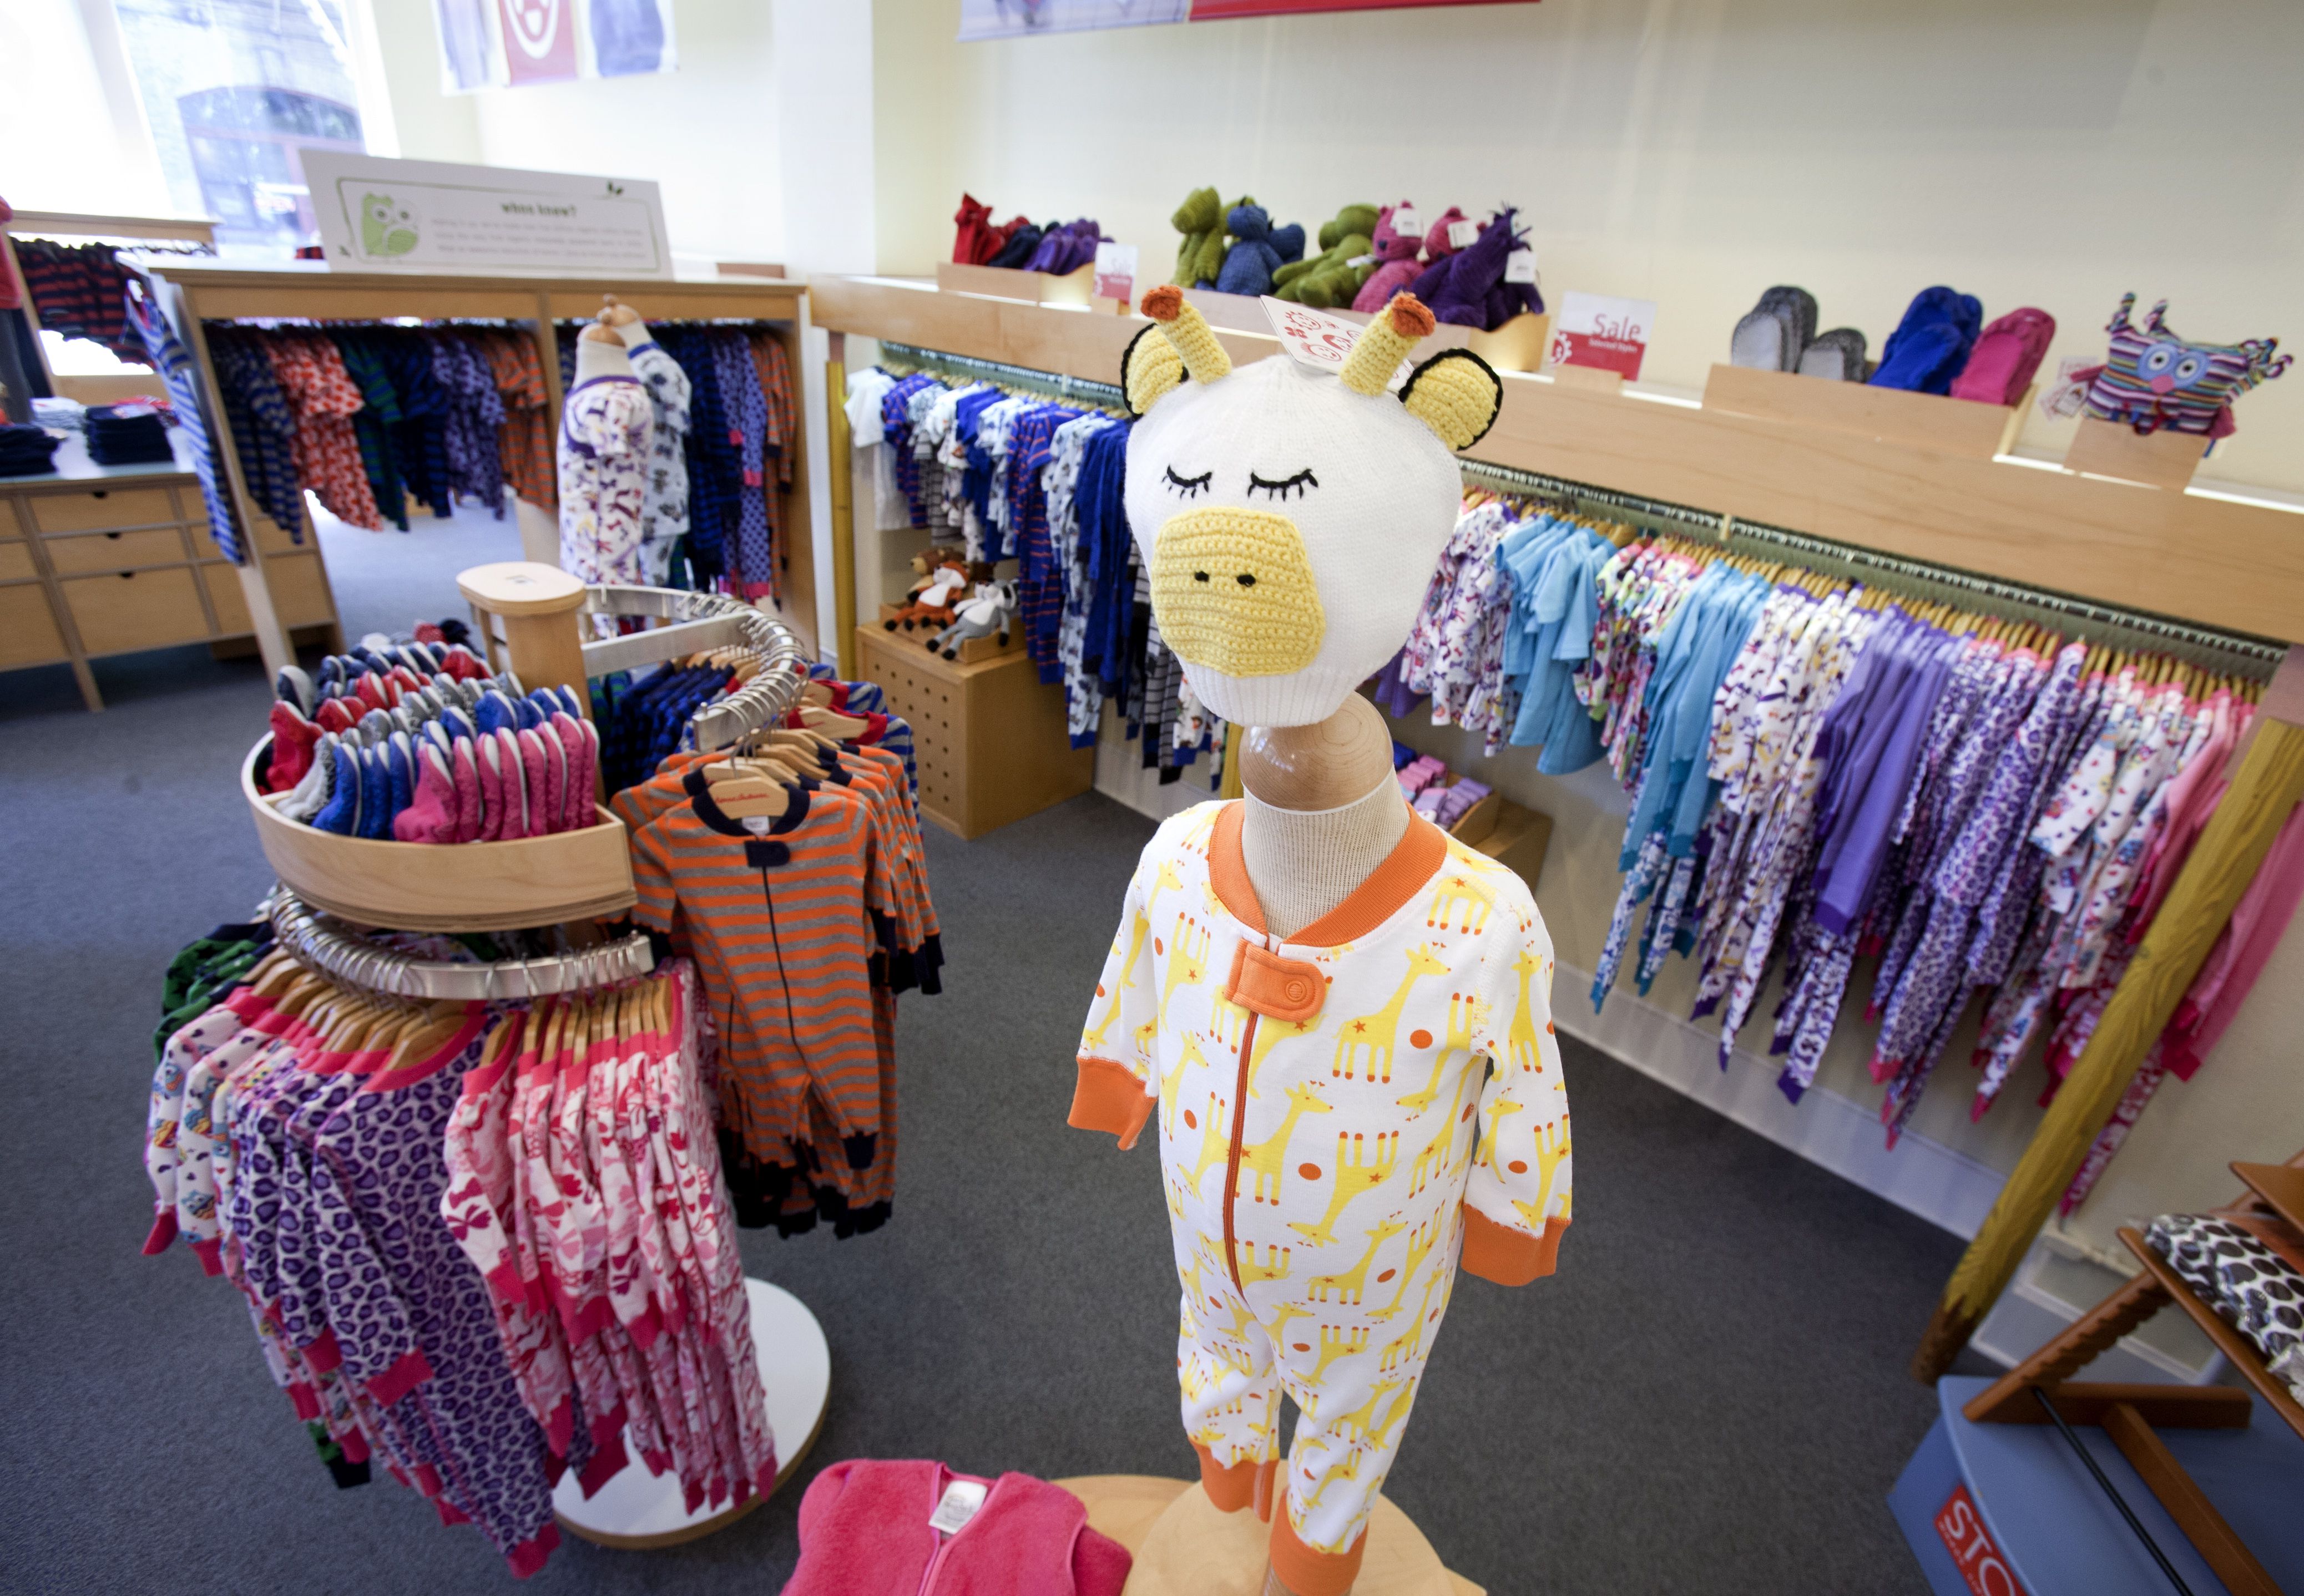 Portland children's clothing retailer Hanna Andersson says hackers